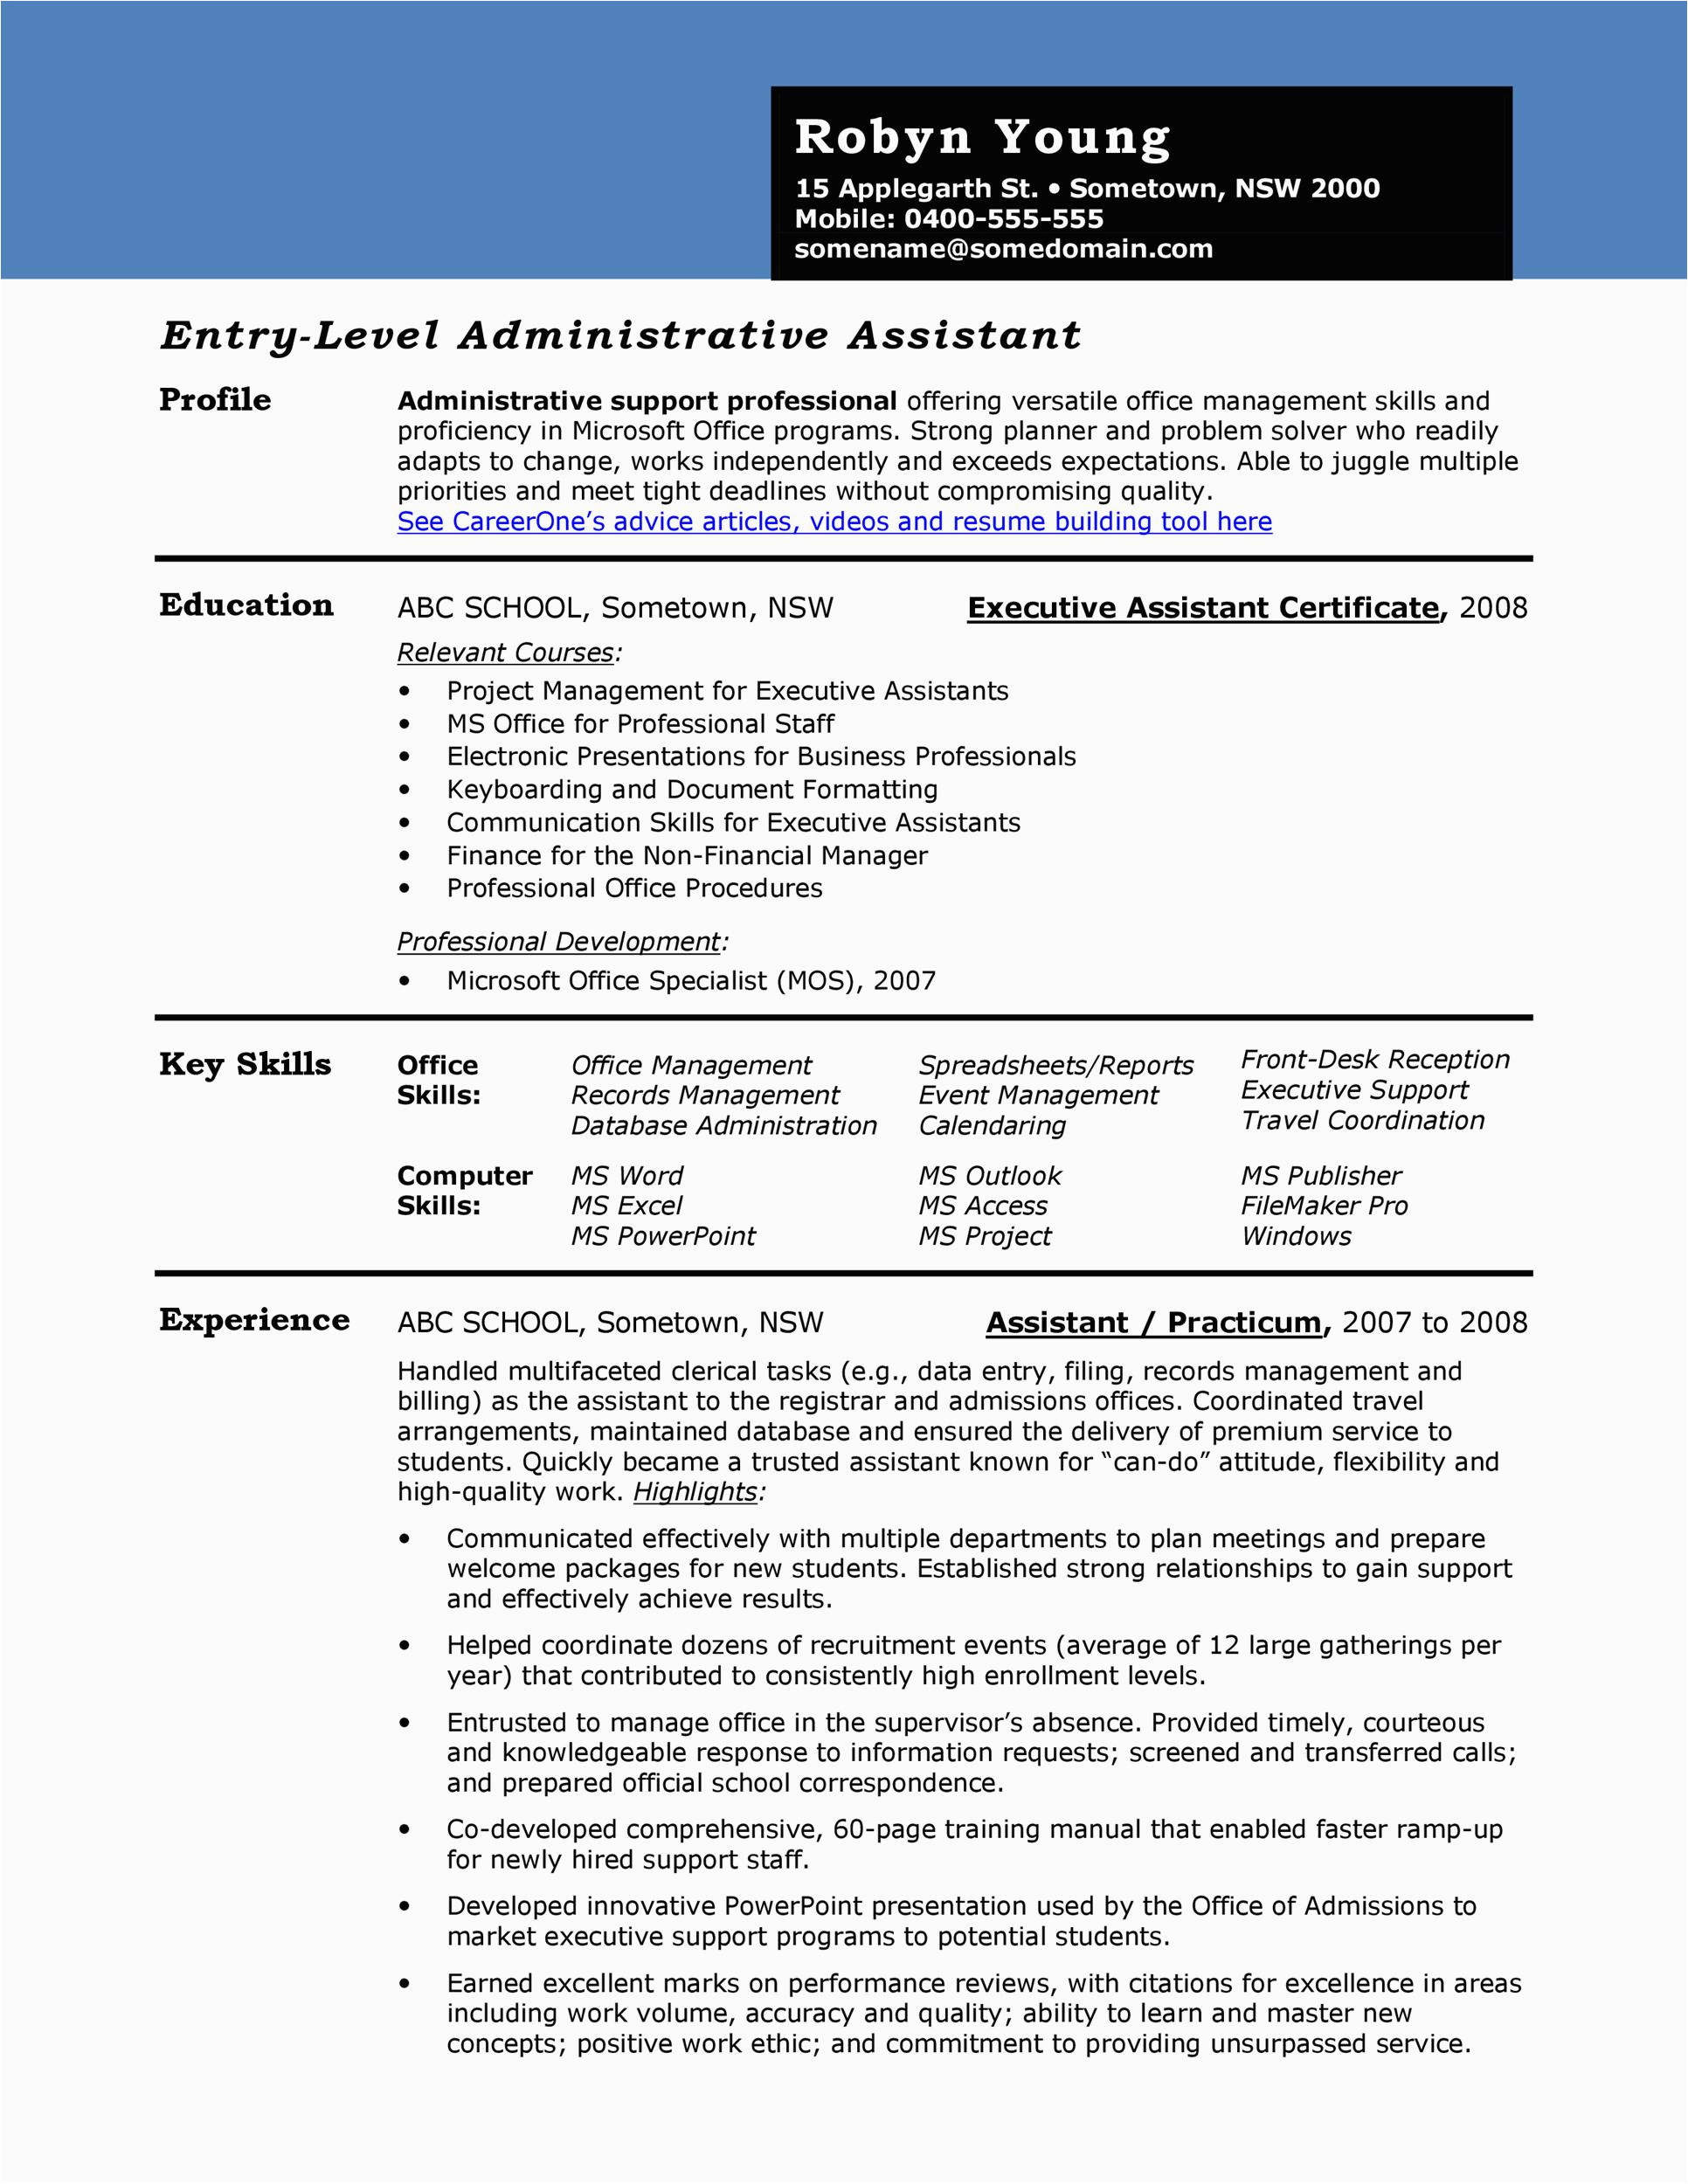 Sample Resume Templates for Administrative assistant 20 Free Administrative assistant Resume Samples